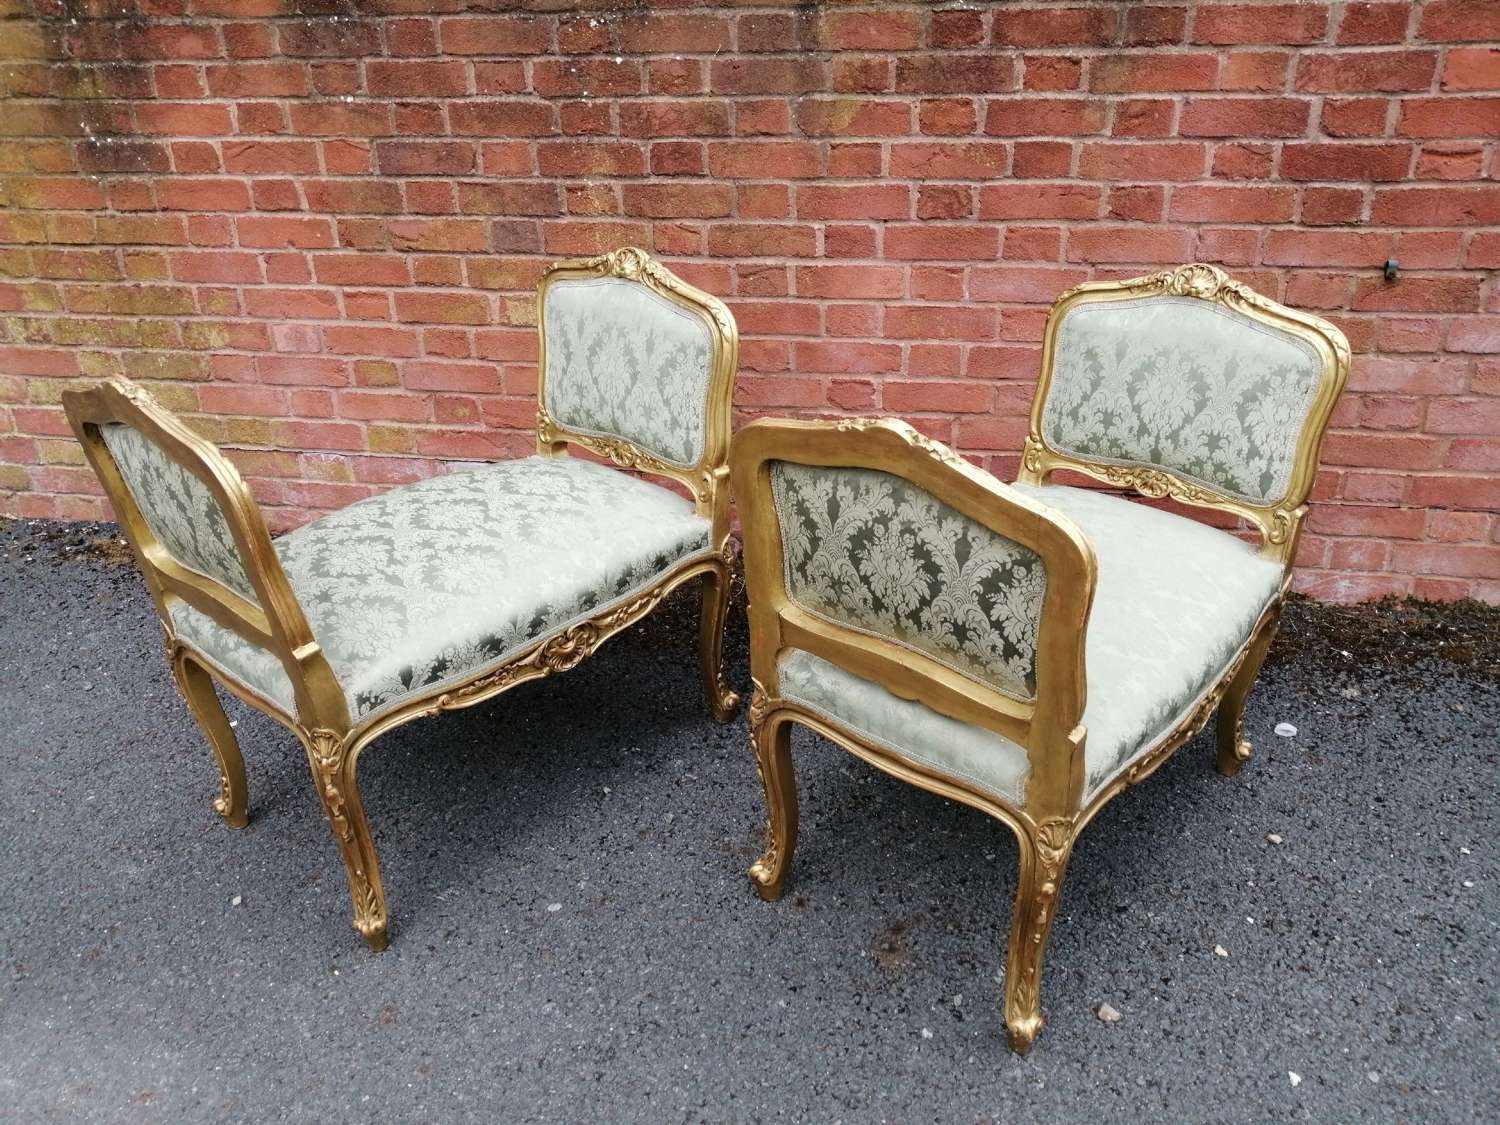 A Superb Pair Of 19th Century French Giltwood Window Seats